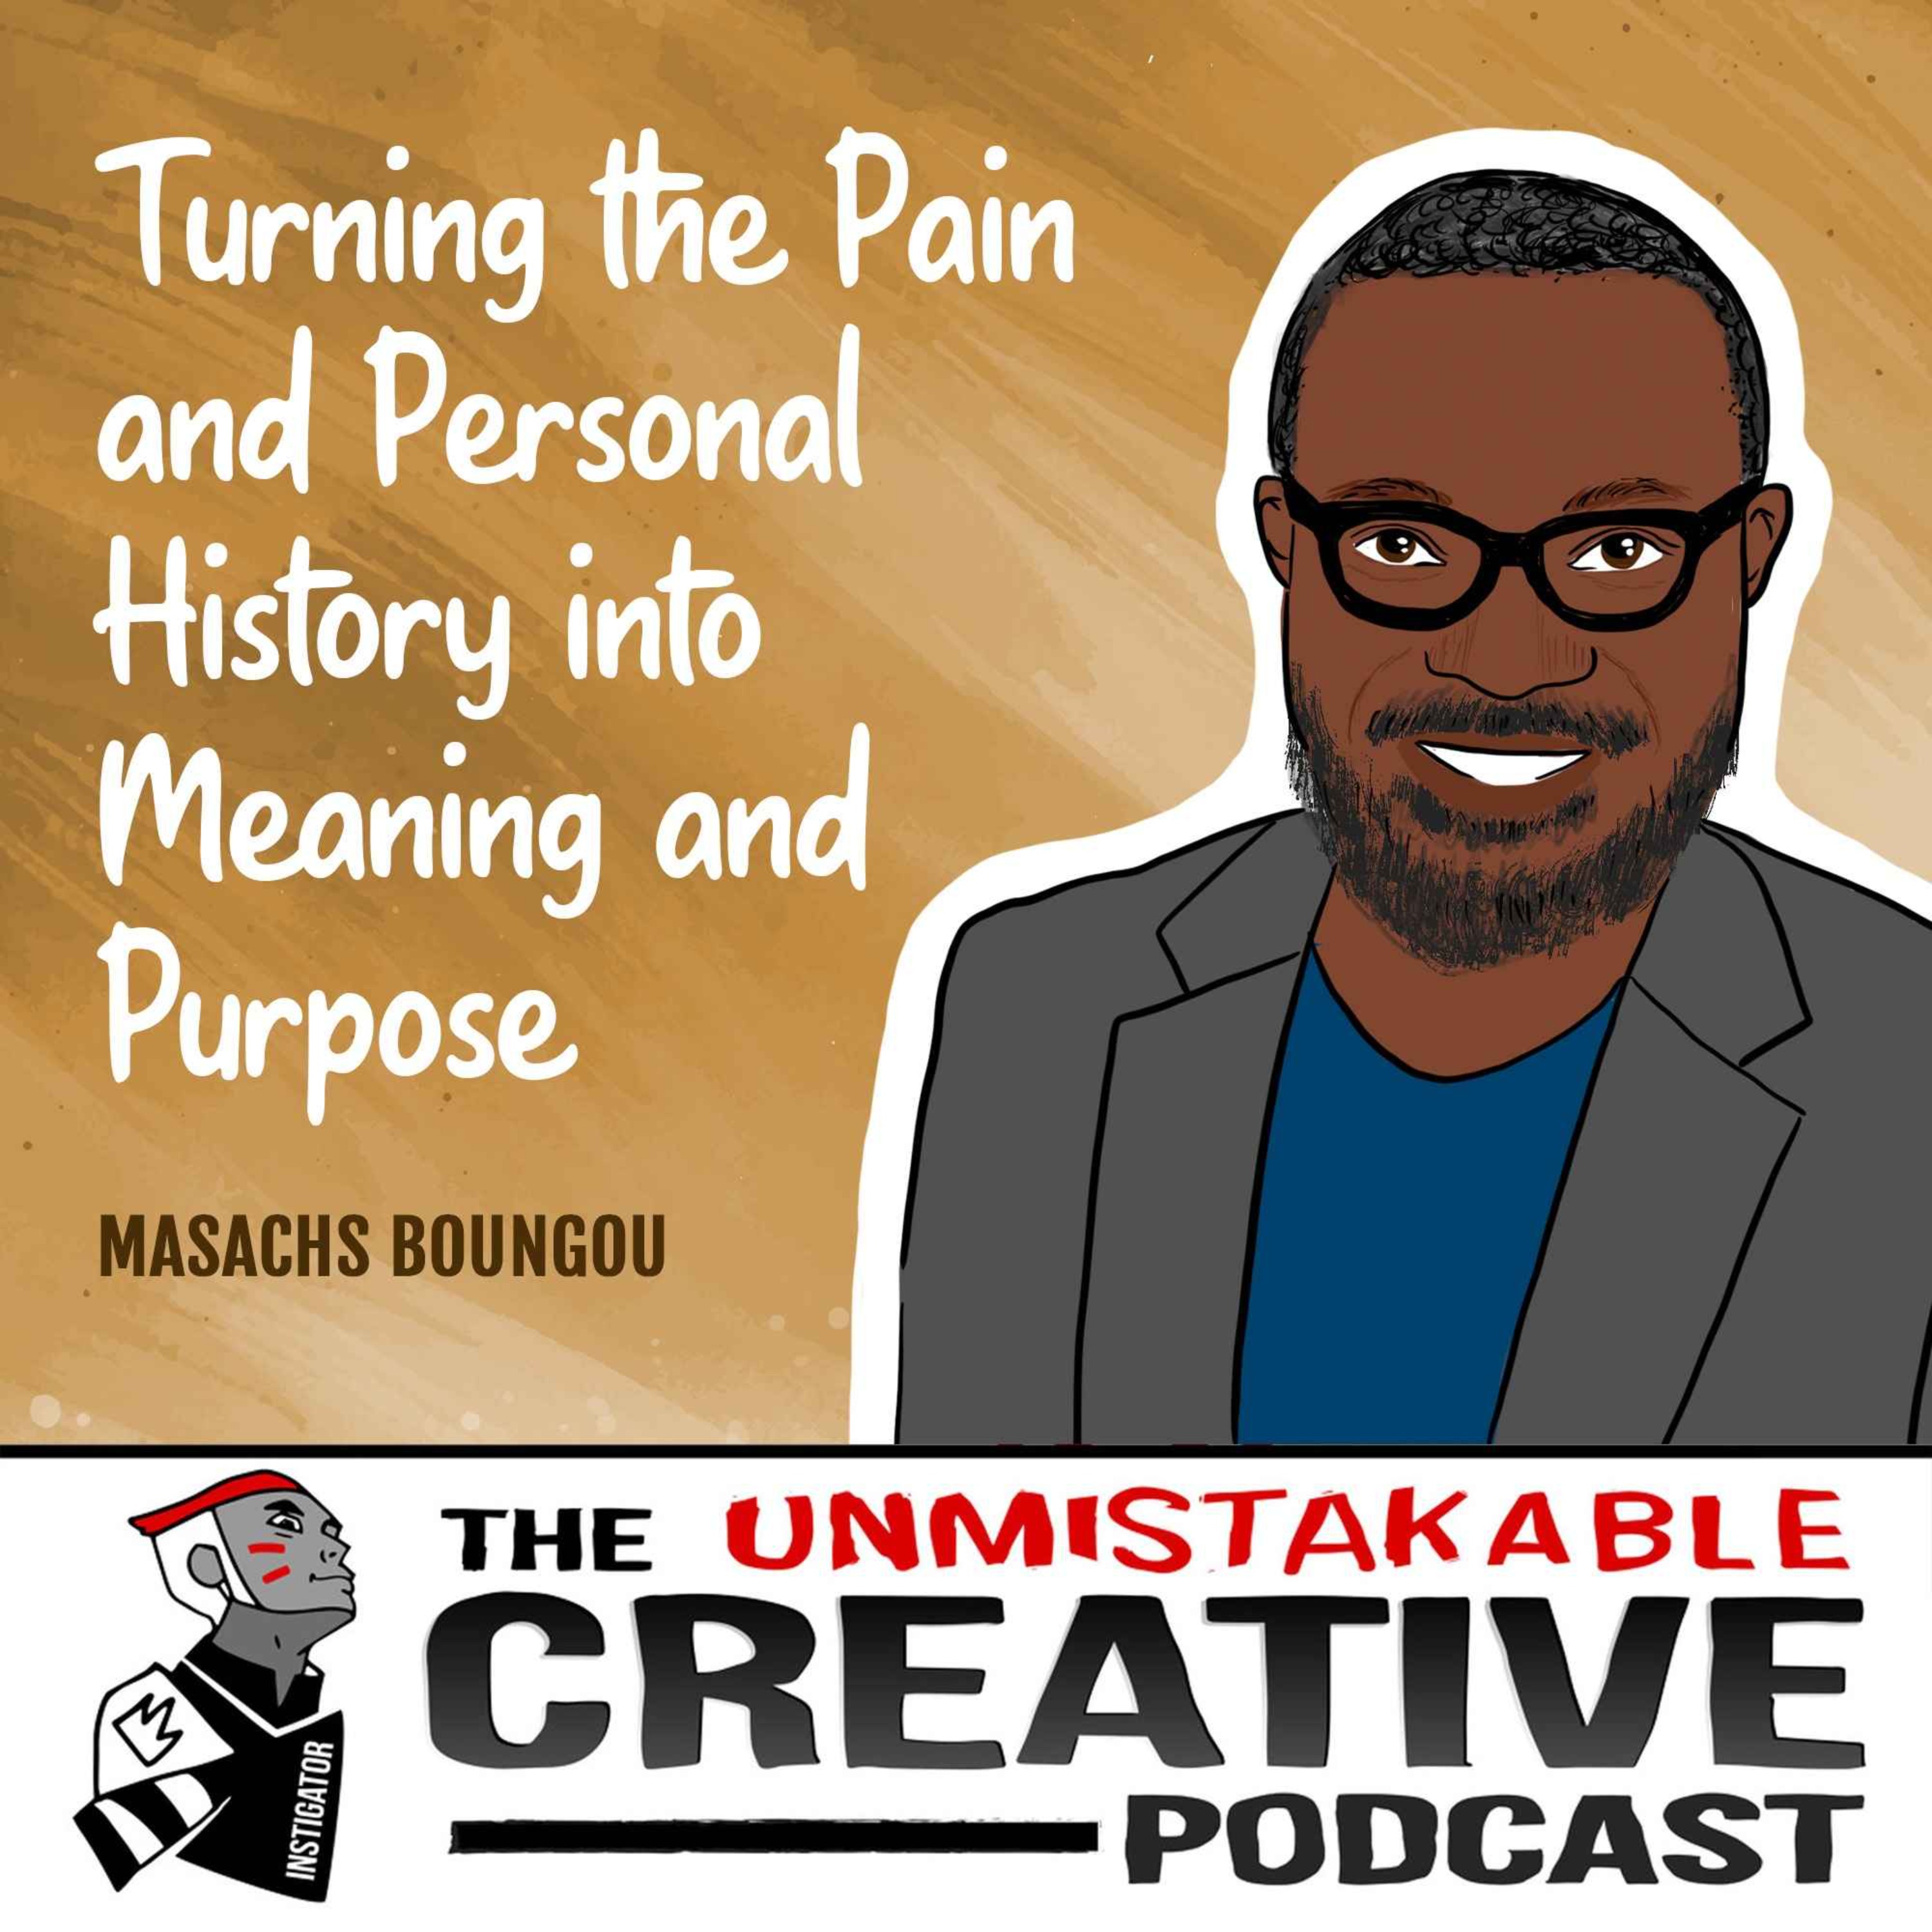 Masachs Boungou | Turning the Pain and Personal History into Meaning and Purpose Image